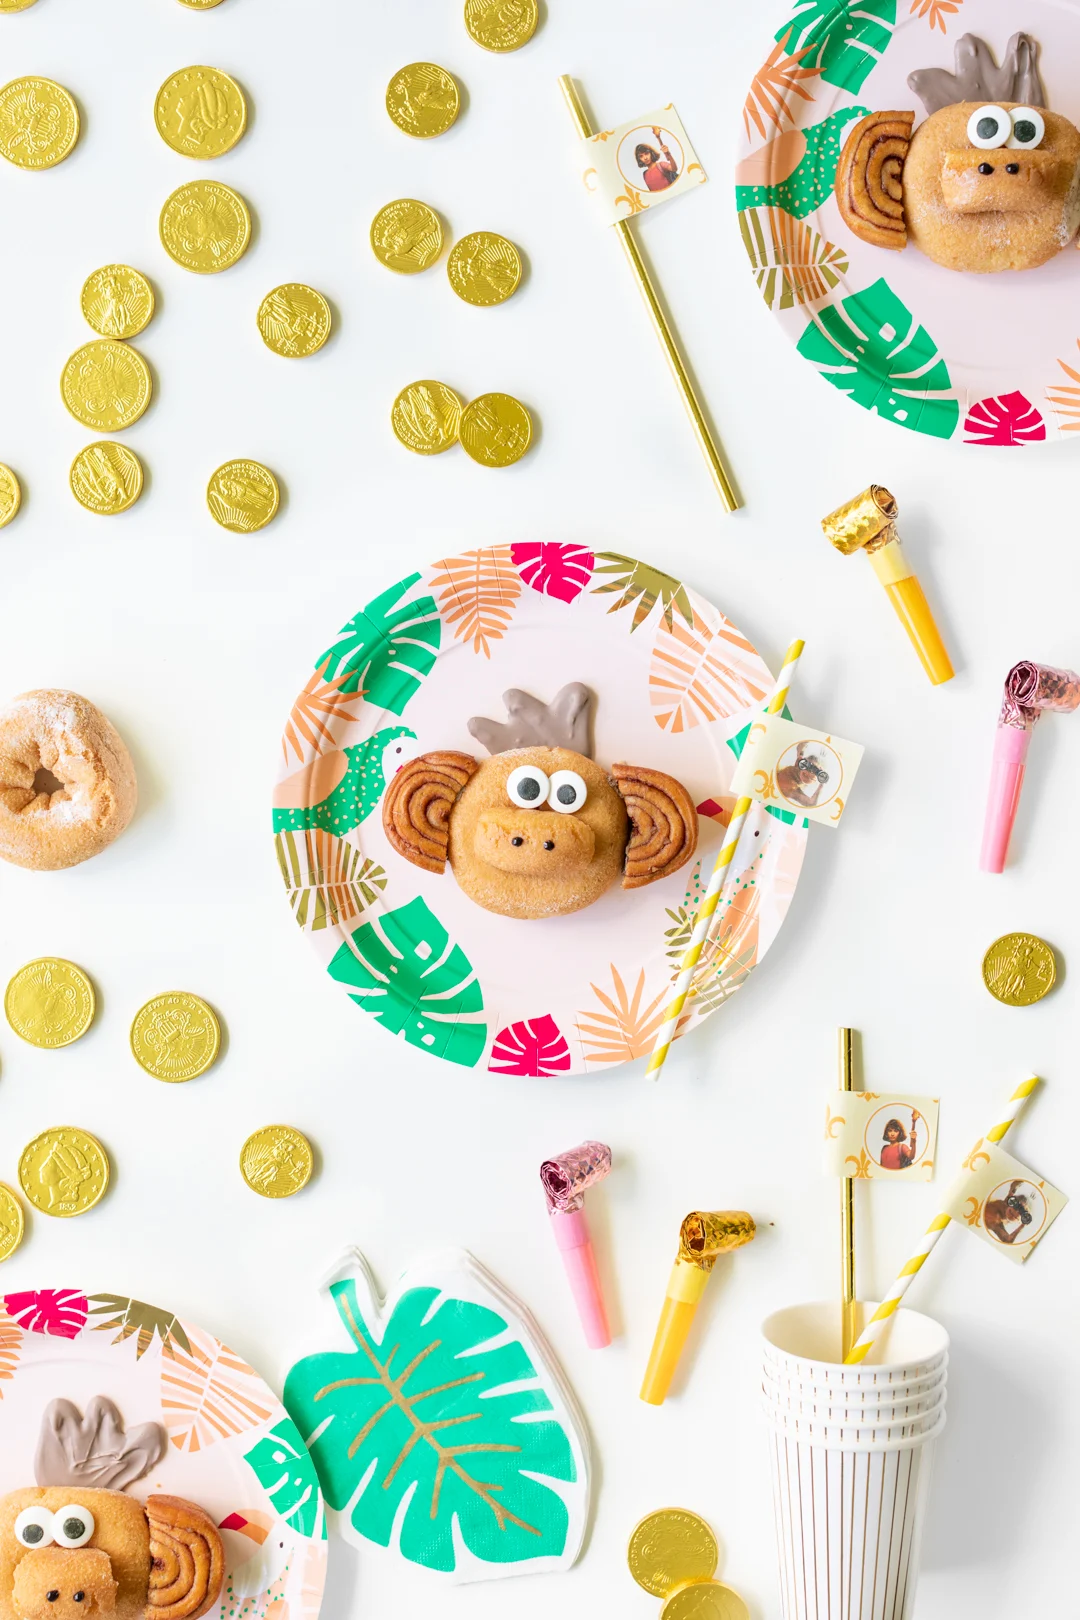 Cute Monkey Donut Creation in a jungle tropical party setting